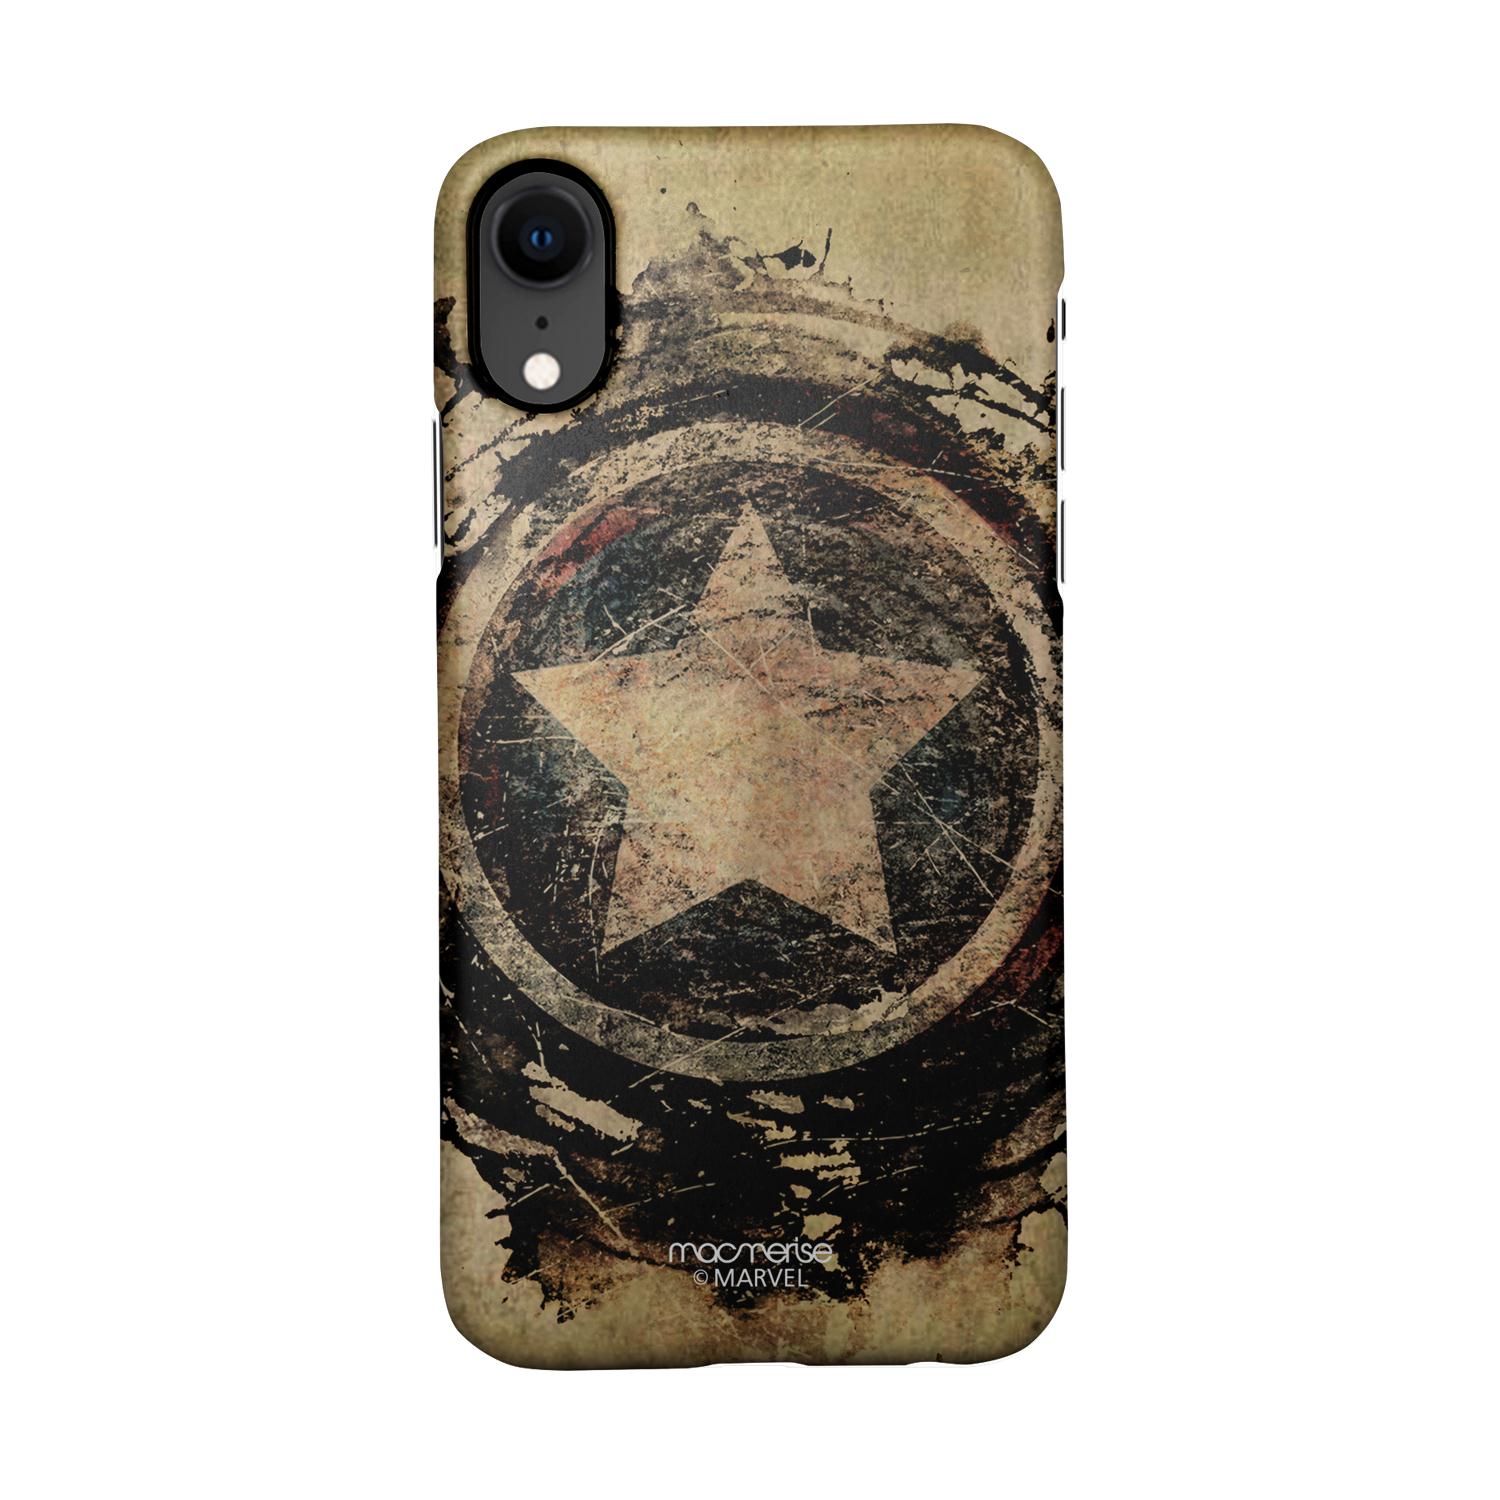 Buy Symbolic Captain Shield - Sleek Phone Case for iPhone XR Online